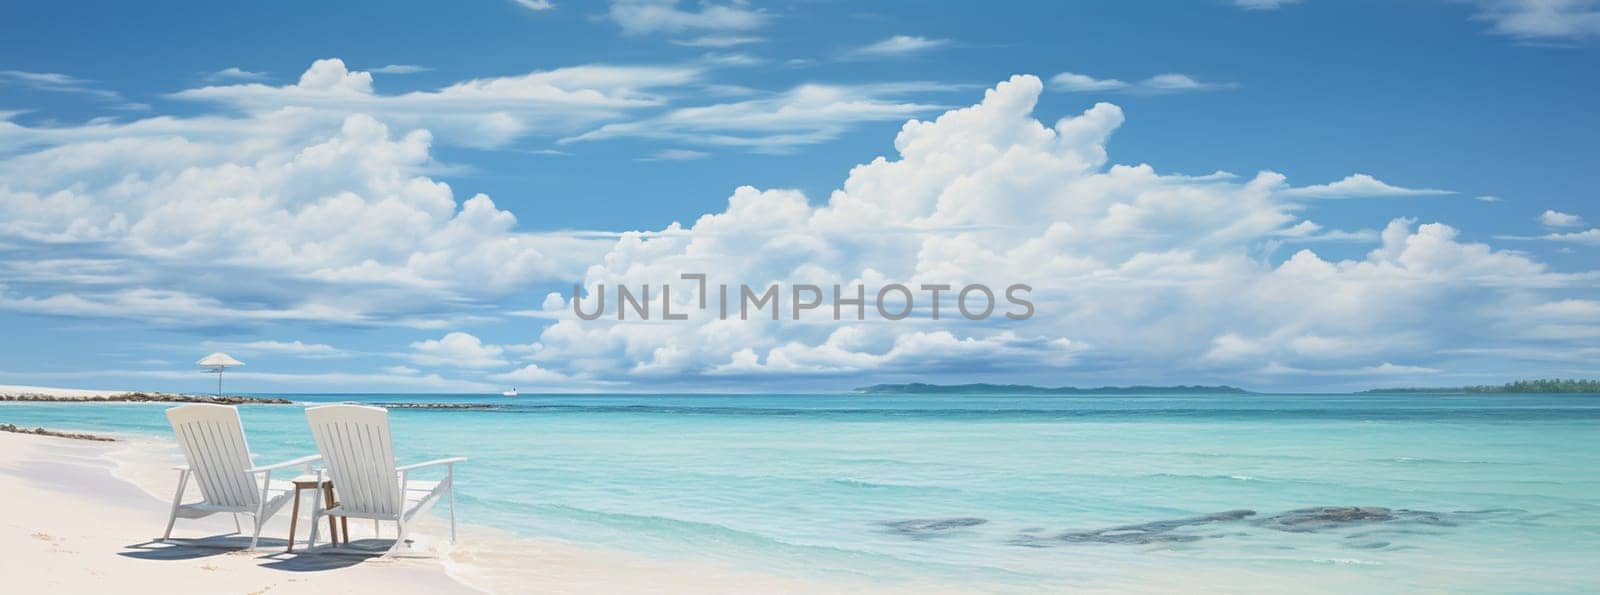 Sea Background Shore Blue Water White Sky Season Summer Tropical Ocean Beautiful Wave Seascape Vacation Smooth Wallpaper Island Outdoor Tropical Coast Sandy Nature Landscape Space for Travel Relax. High quality photo